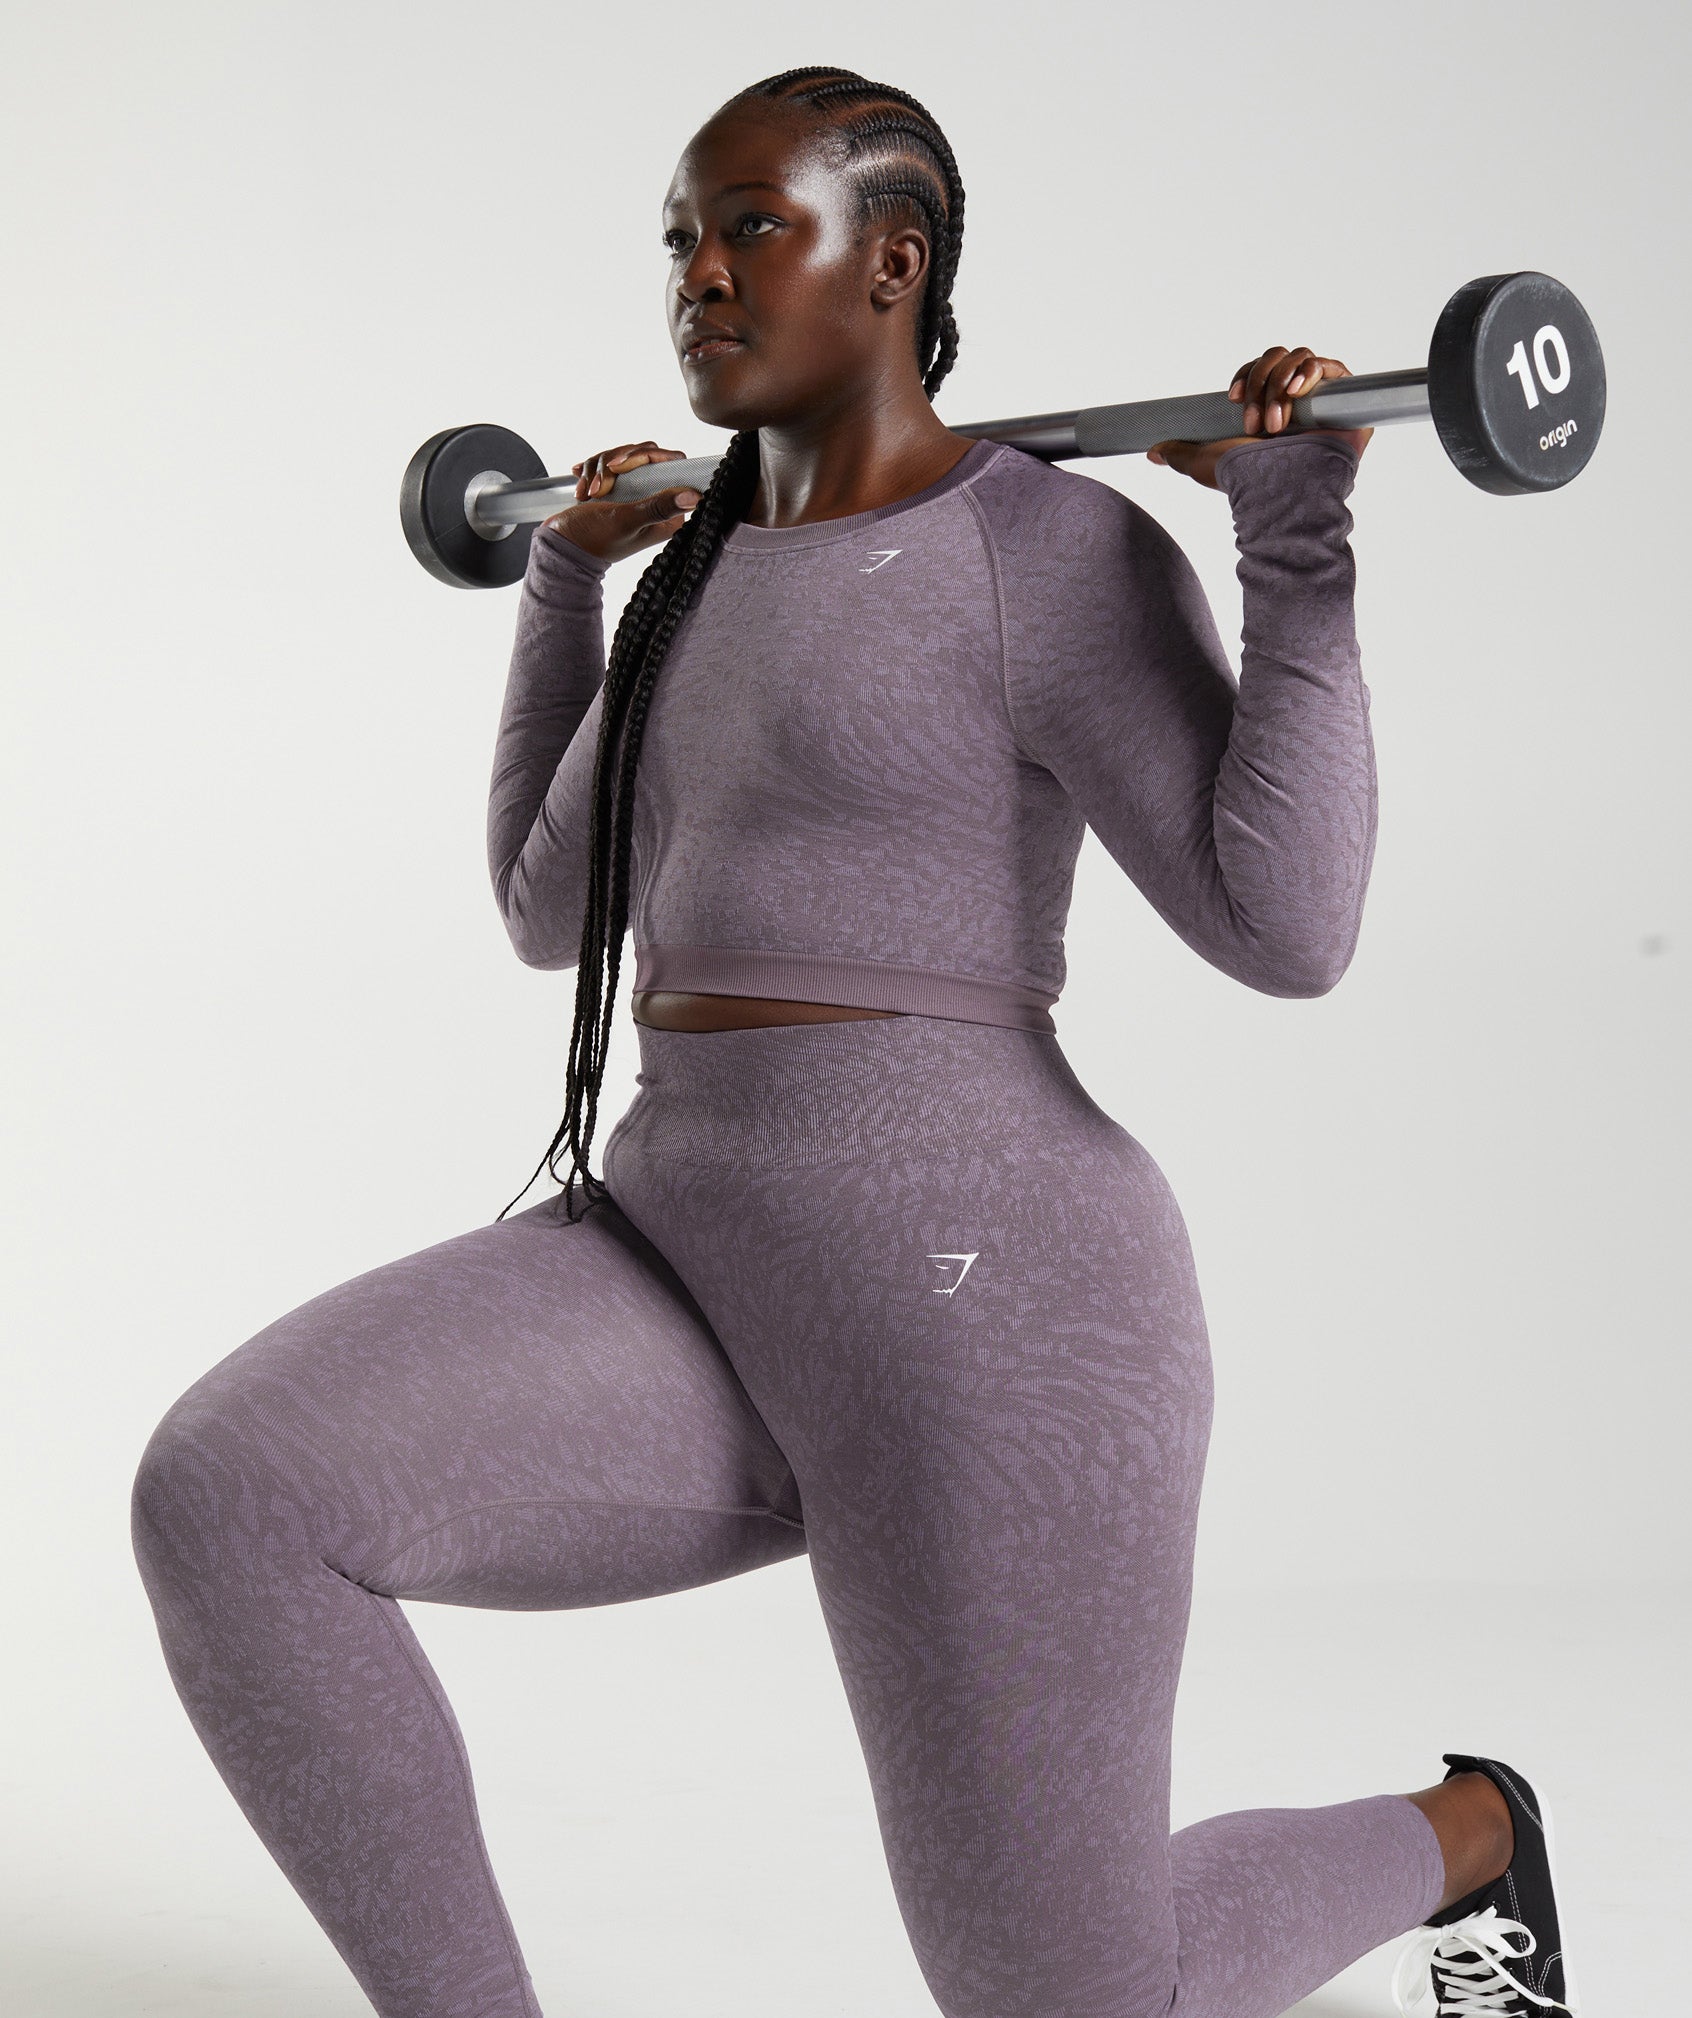 Seamlessly Wild Leggings – MUSCLE SOLUTION